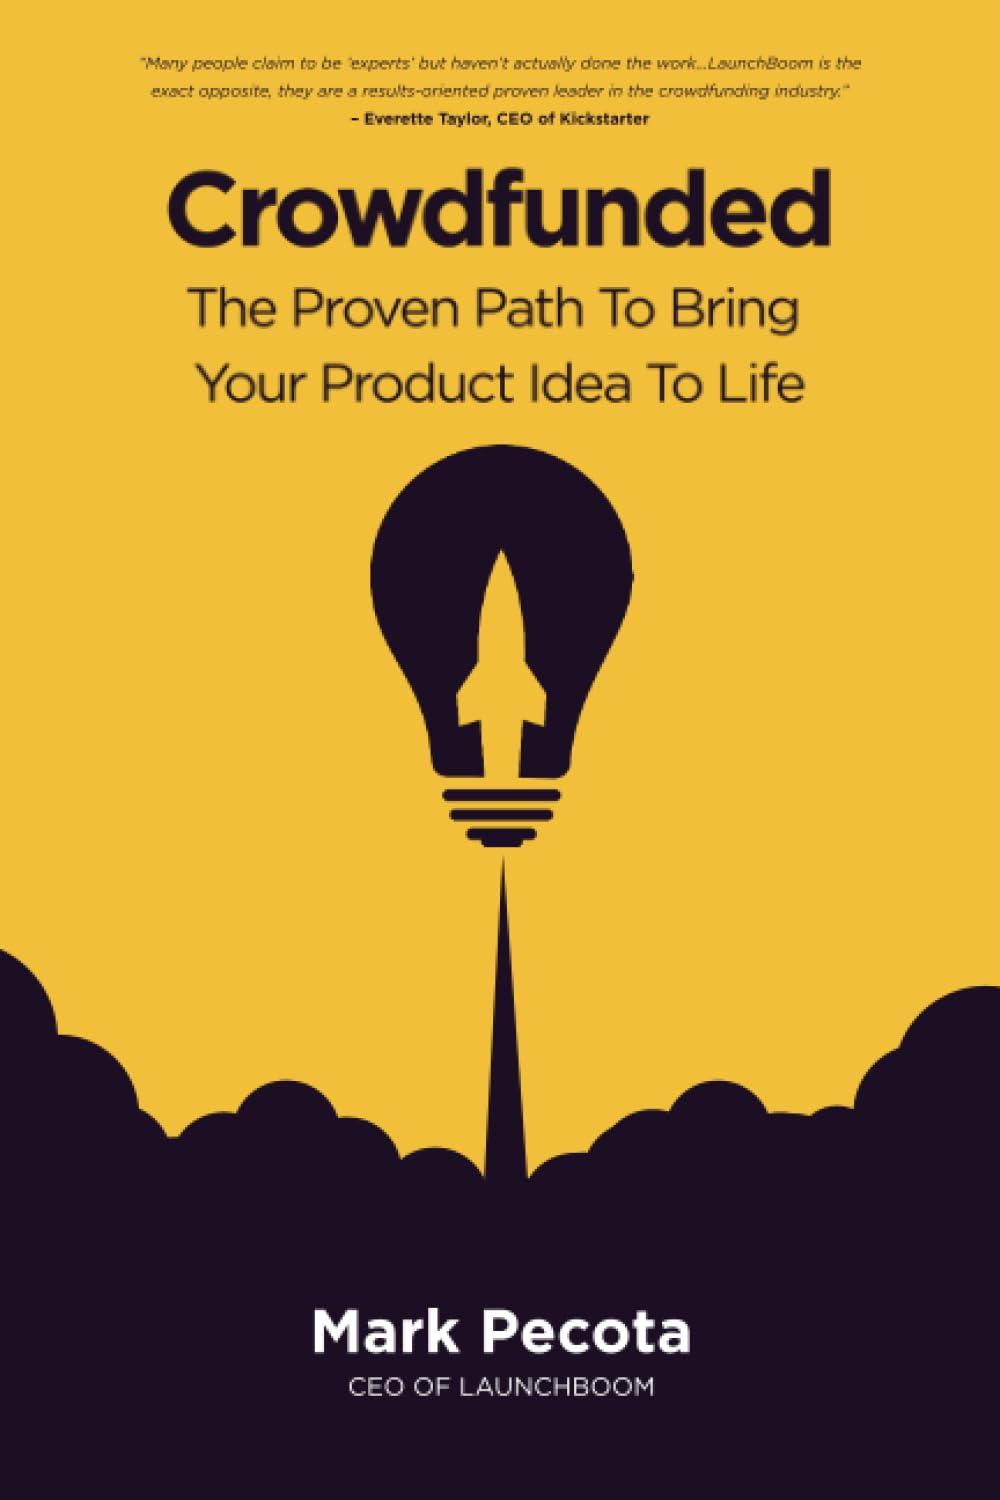 crowdfunded the proven path to bring your product idea to life 1st edition mark pecota b0cdf4m692,